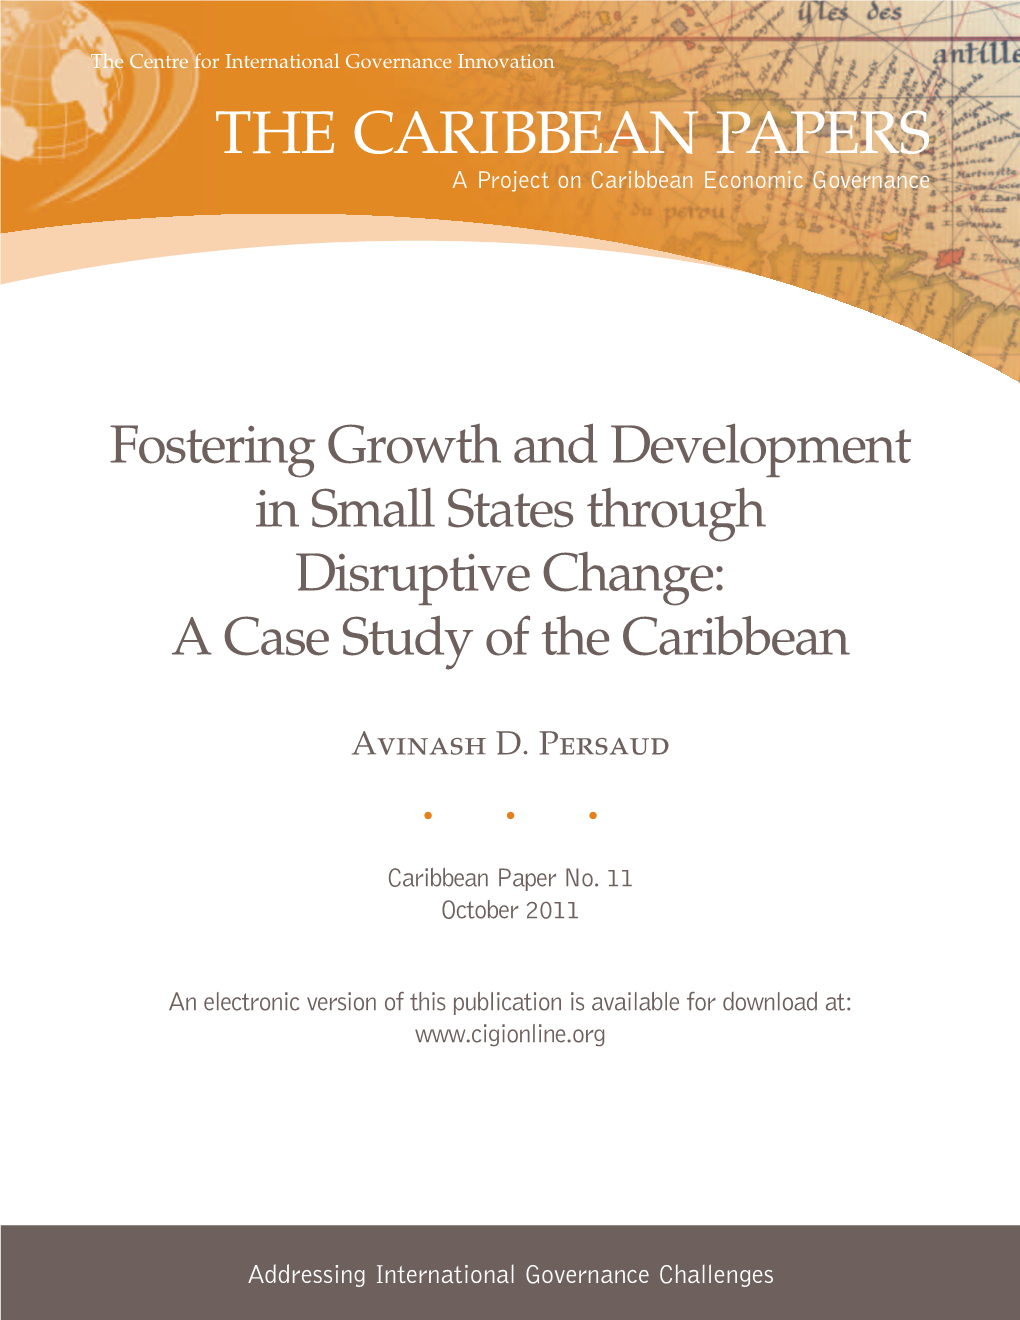 THE CARIBBEAN PAPERS a Project on Caribbean Economic Governance